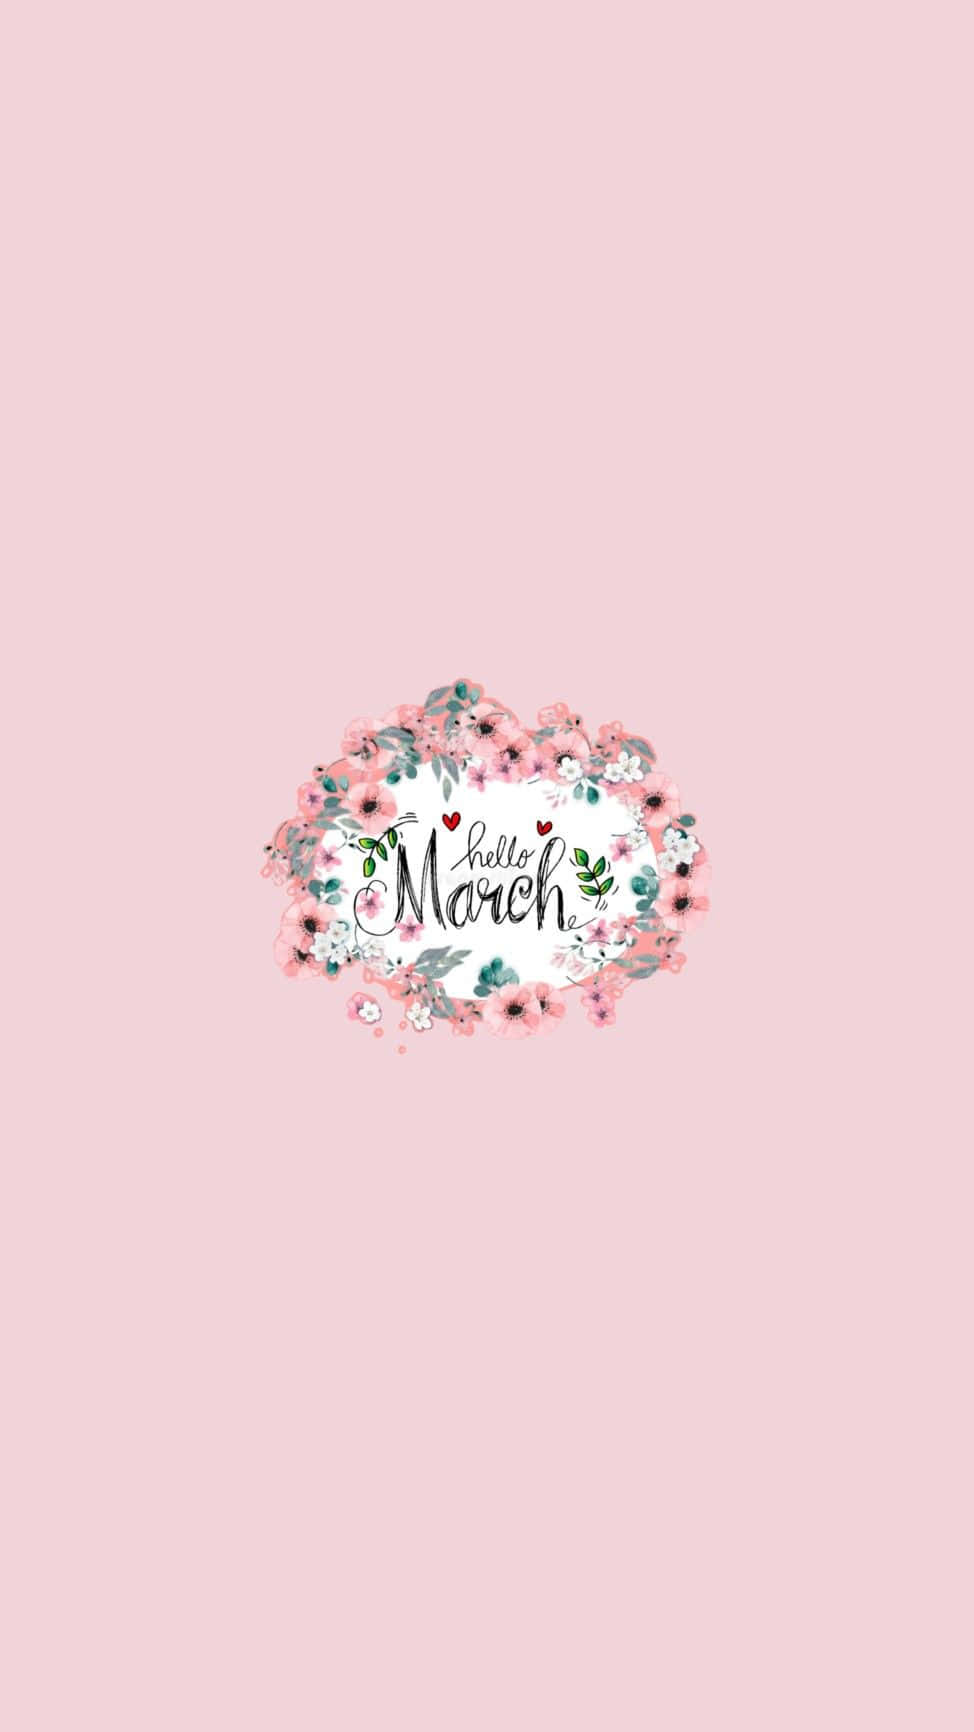 March Floral Greeting Background Wallpaper